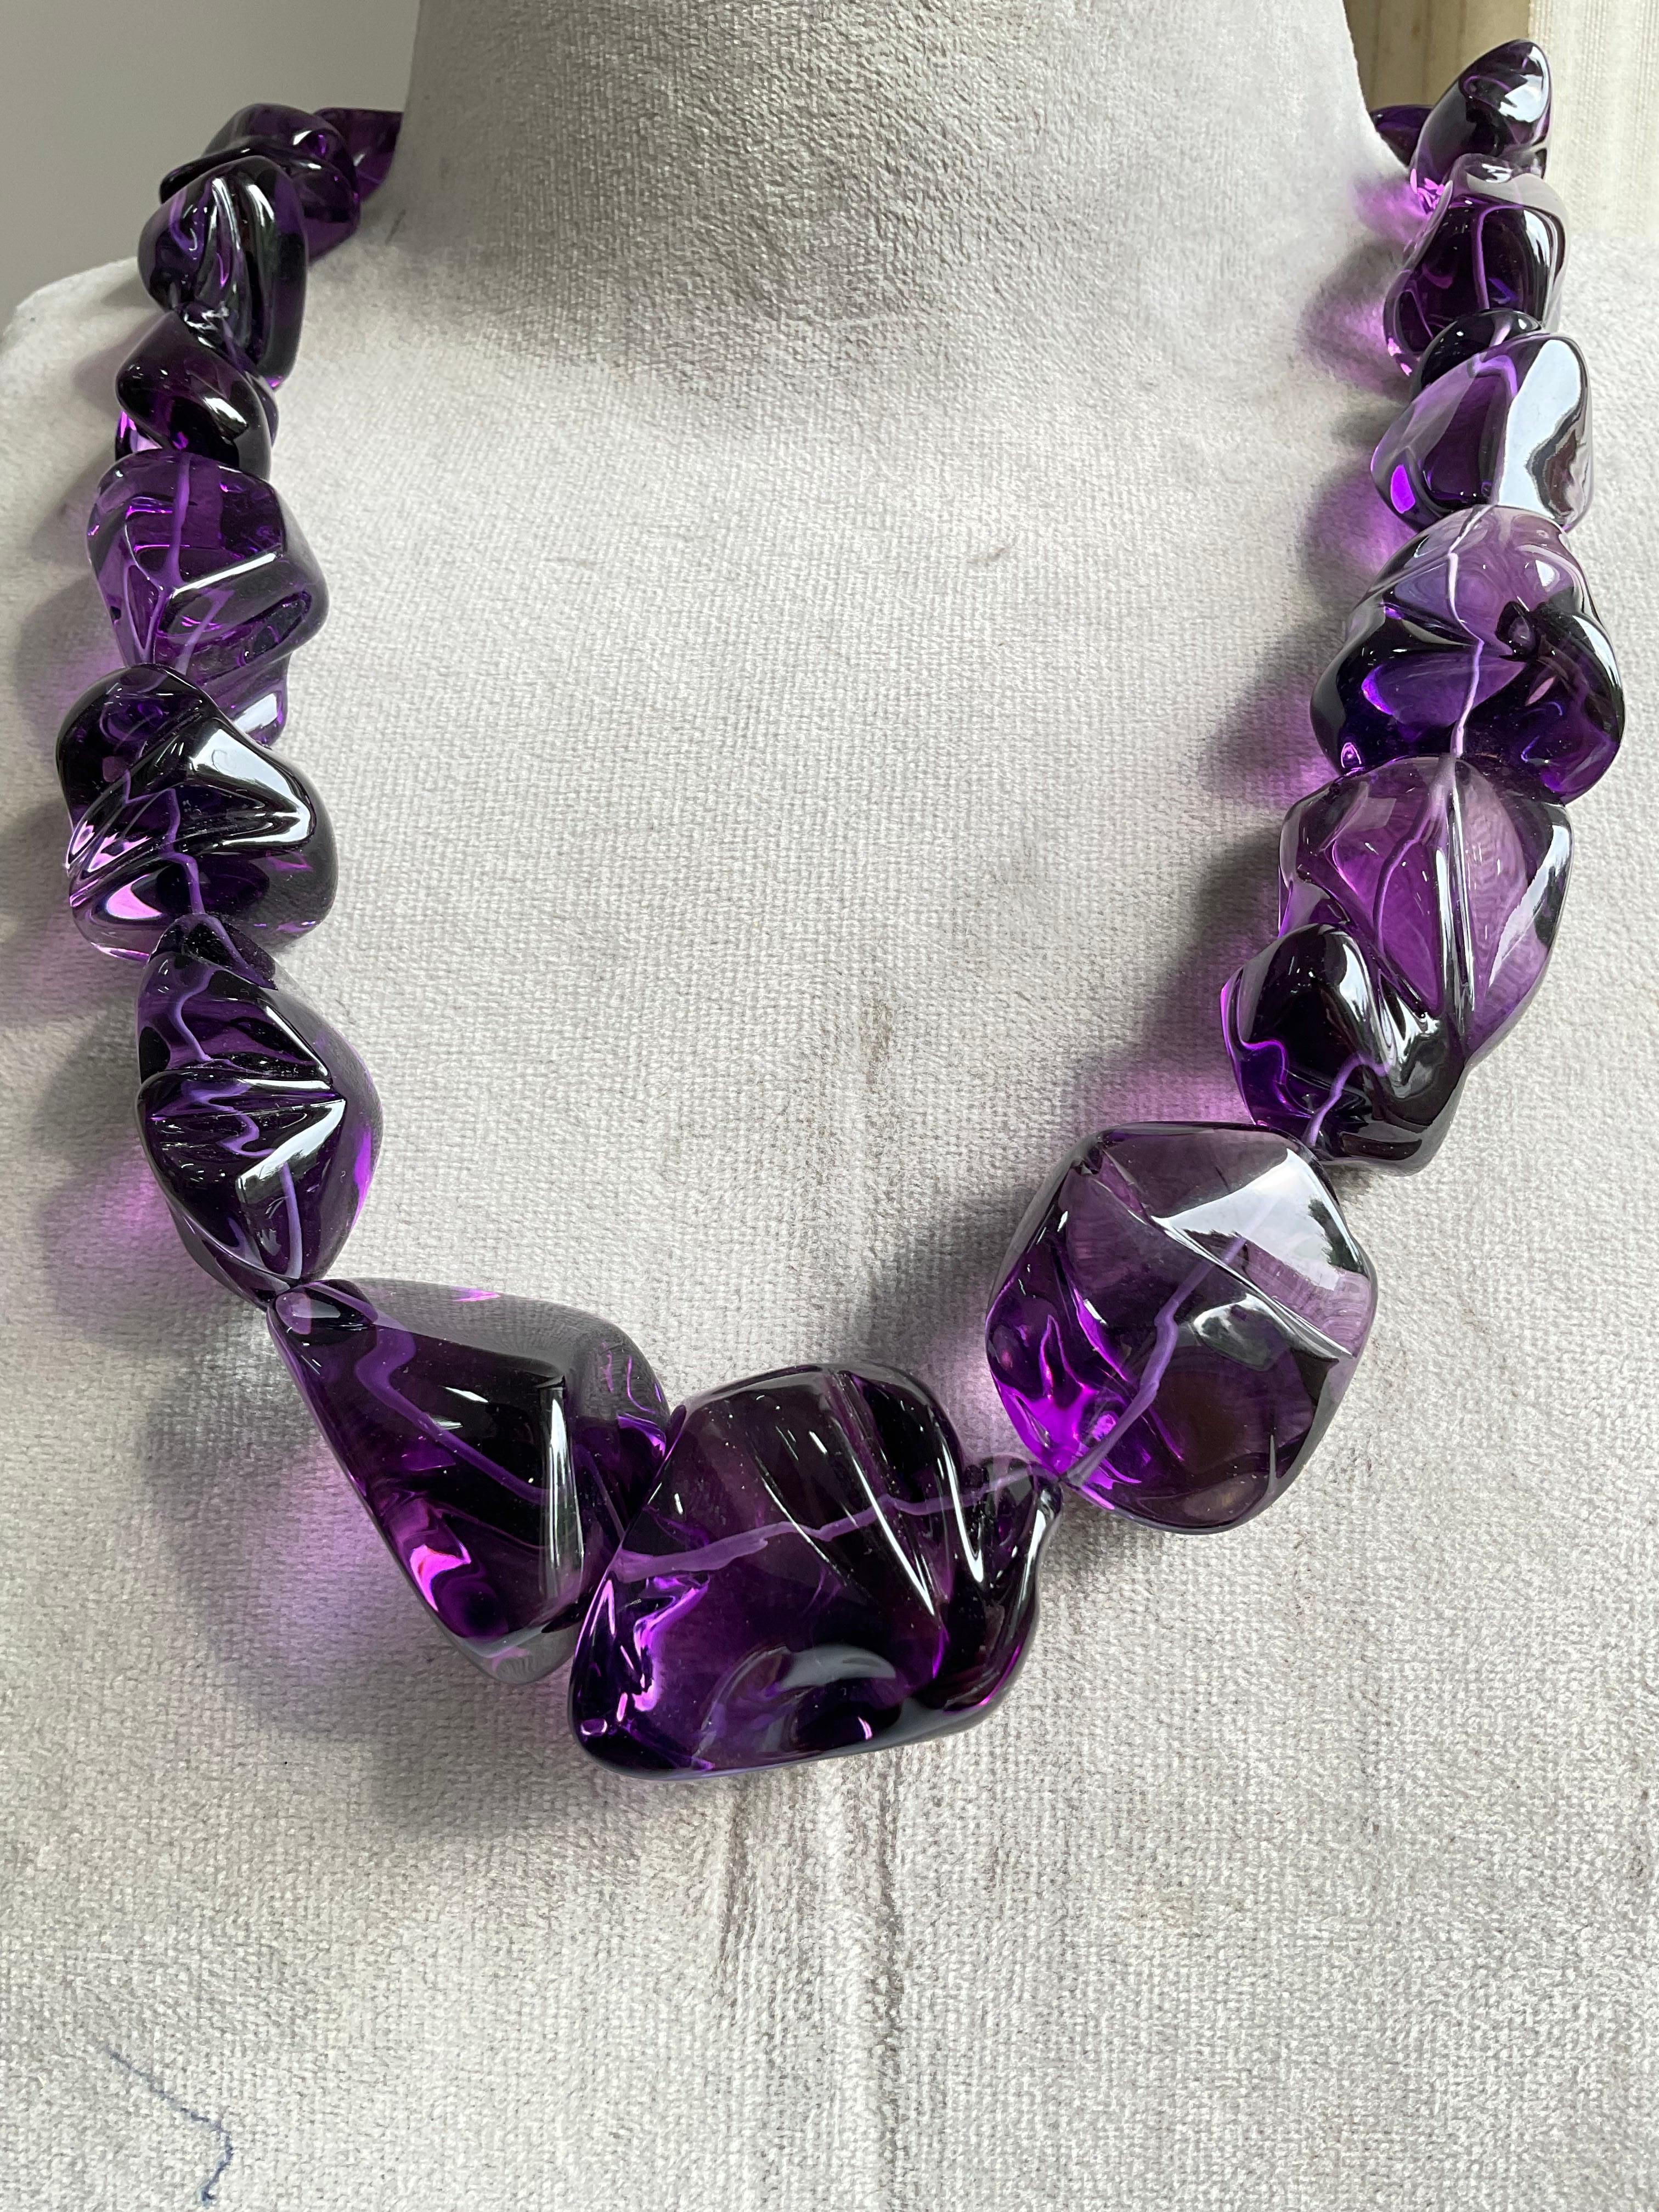 African Amethyst Quartz Beaded Jewelry Necklace Gem quality
Size : 18 X 23 To 30 X 40 MM 
Weight : 1627 Carats
Length Of Necklace : 23 Inch 
Pieces : 19 Gems 